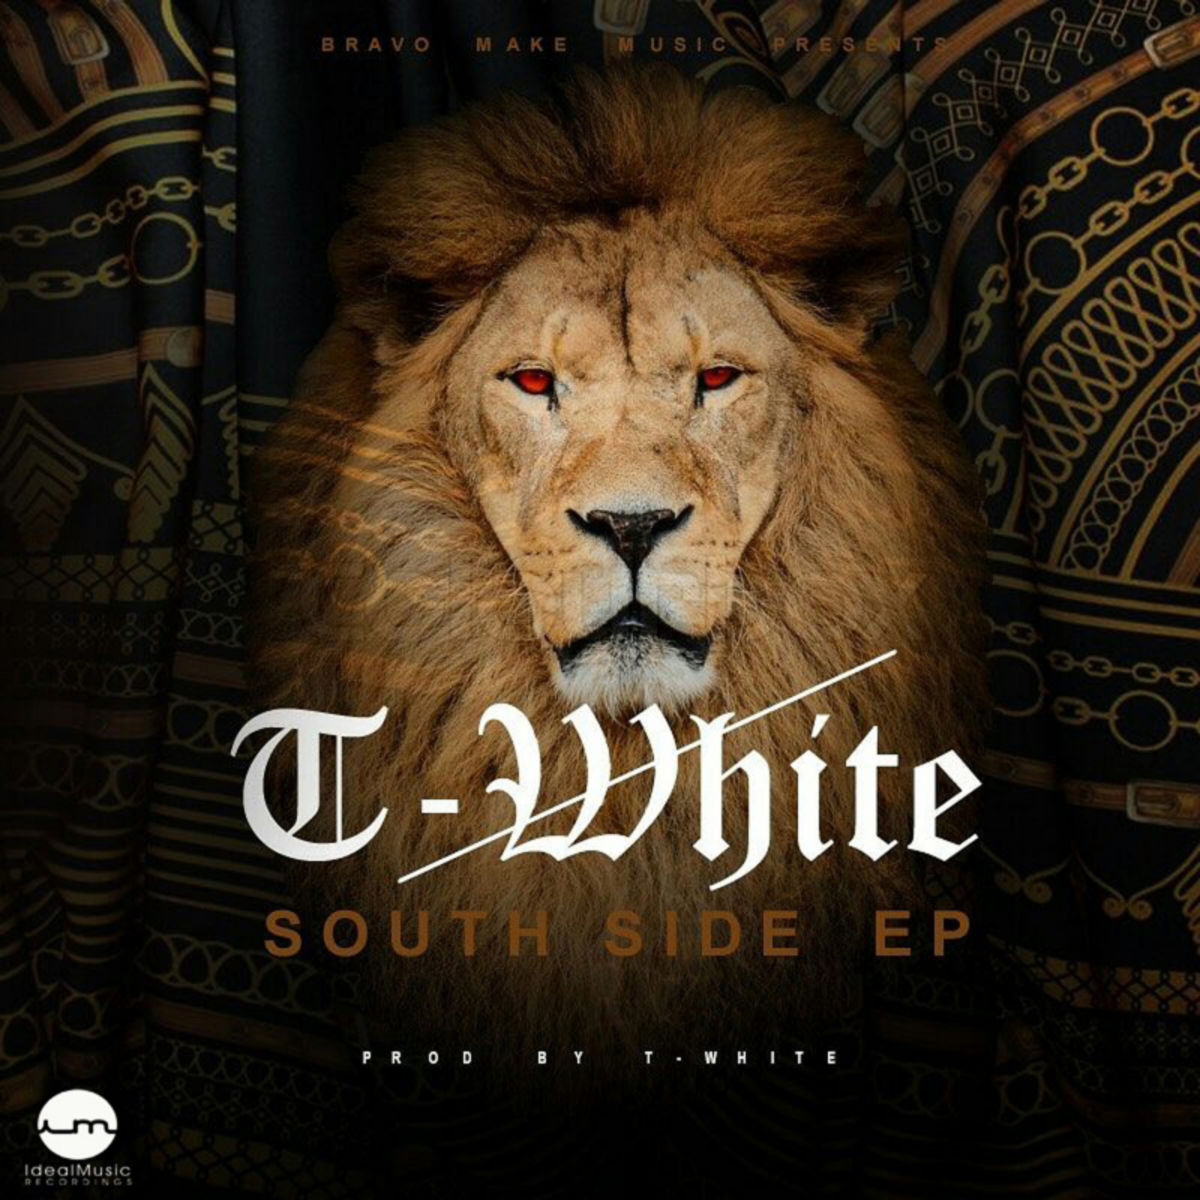 T-white - South Side EP / IdealMusic Recordings